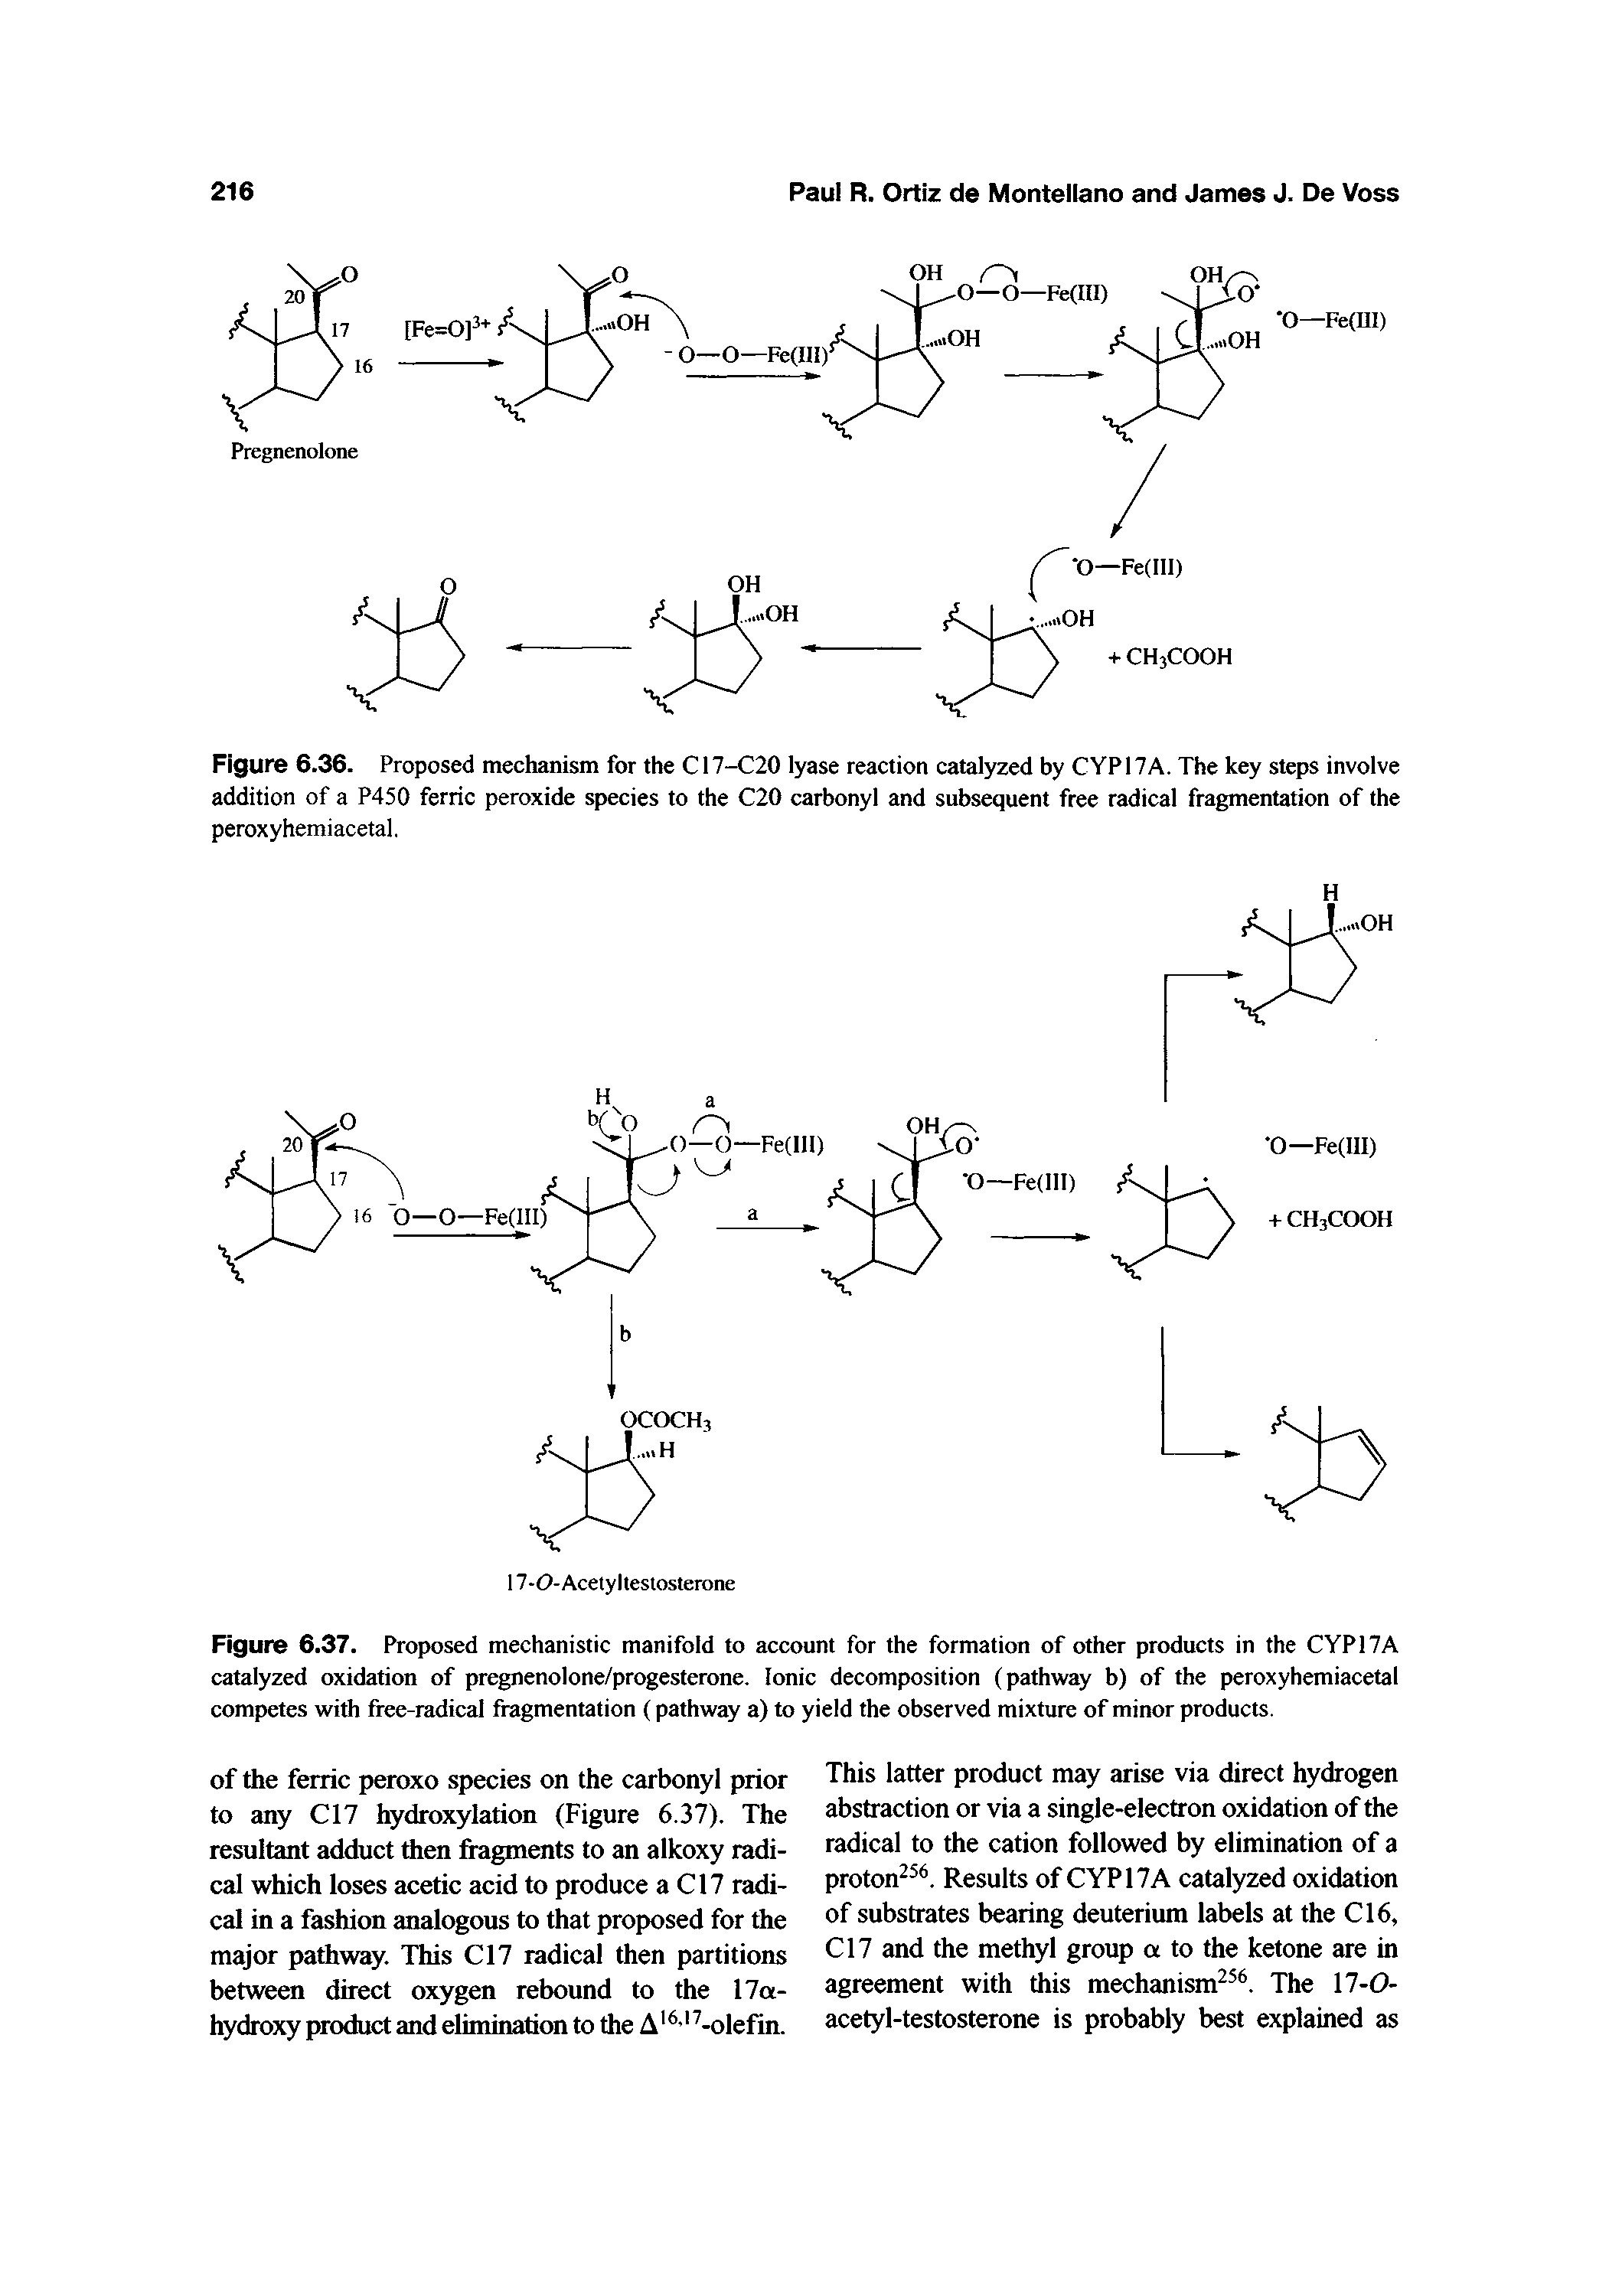 Figure 6.36. Proposed mechanism for the C17-C20 lyase reaction catalyzed by CYPI7A. The key steps involve addition of a P450 ferric peroxide species to the C20 carbonyl and subsequent free radical fragmentation of the peroxyhemiacetal,...